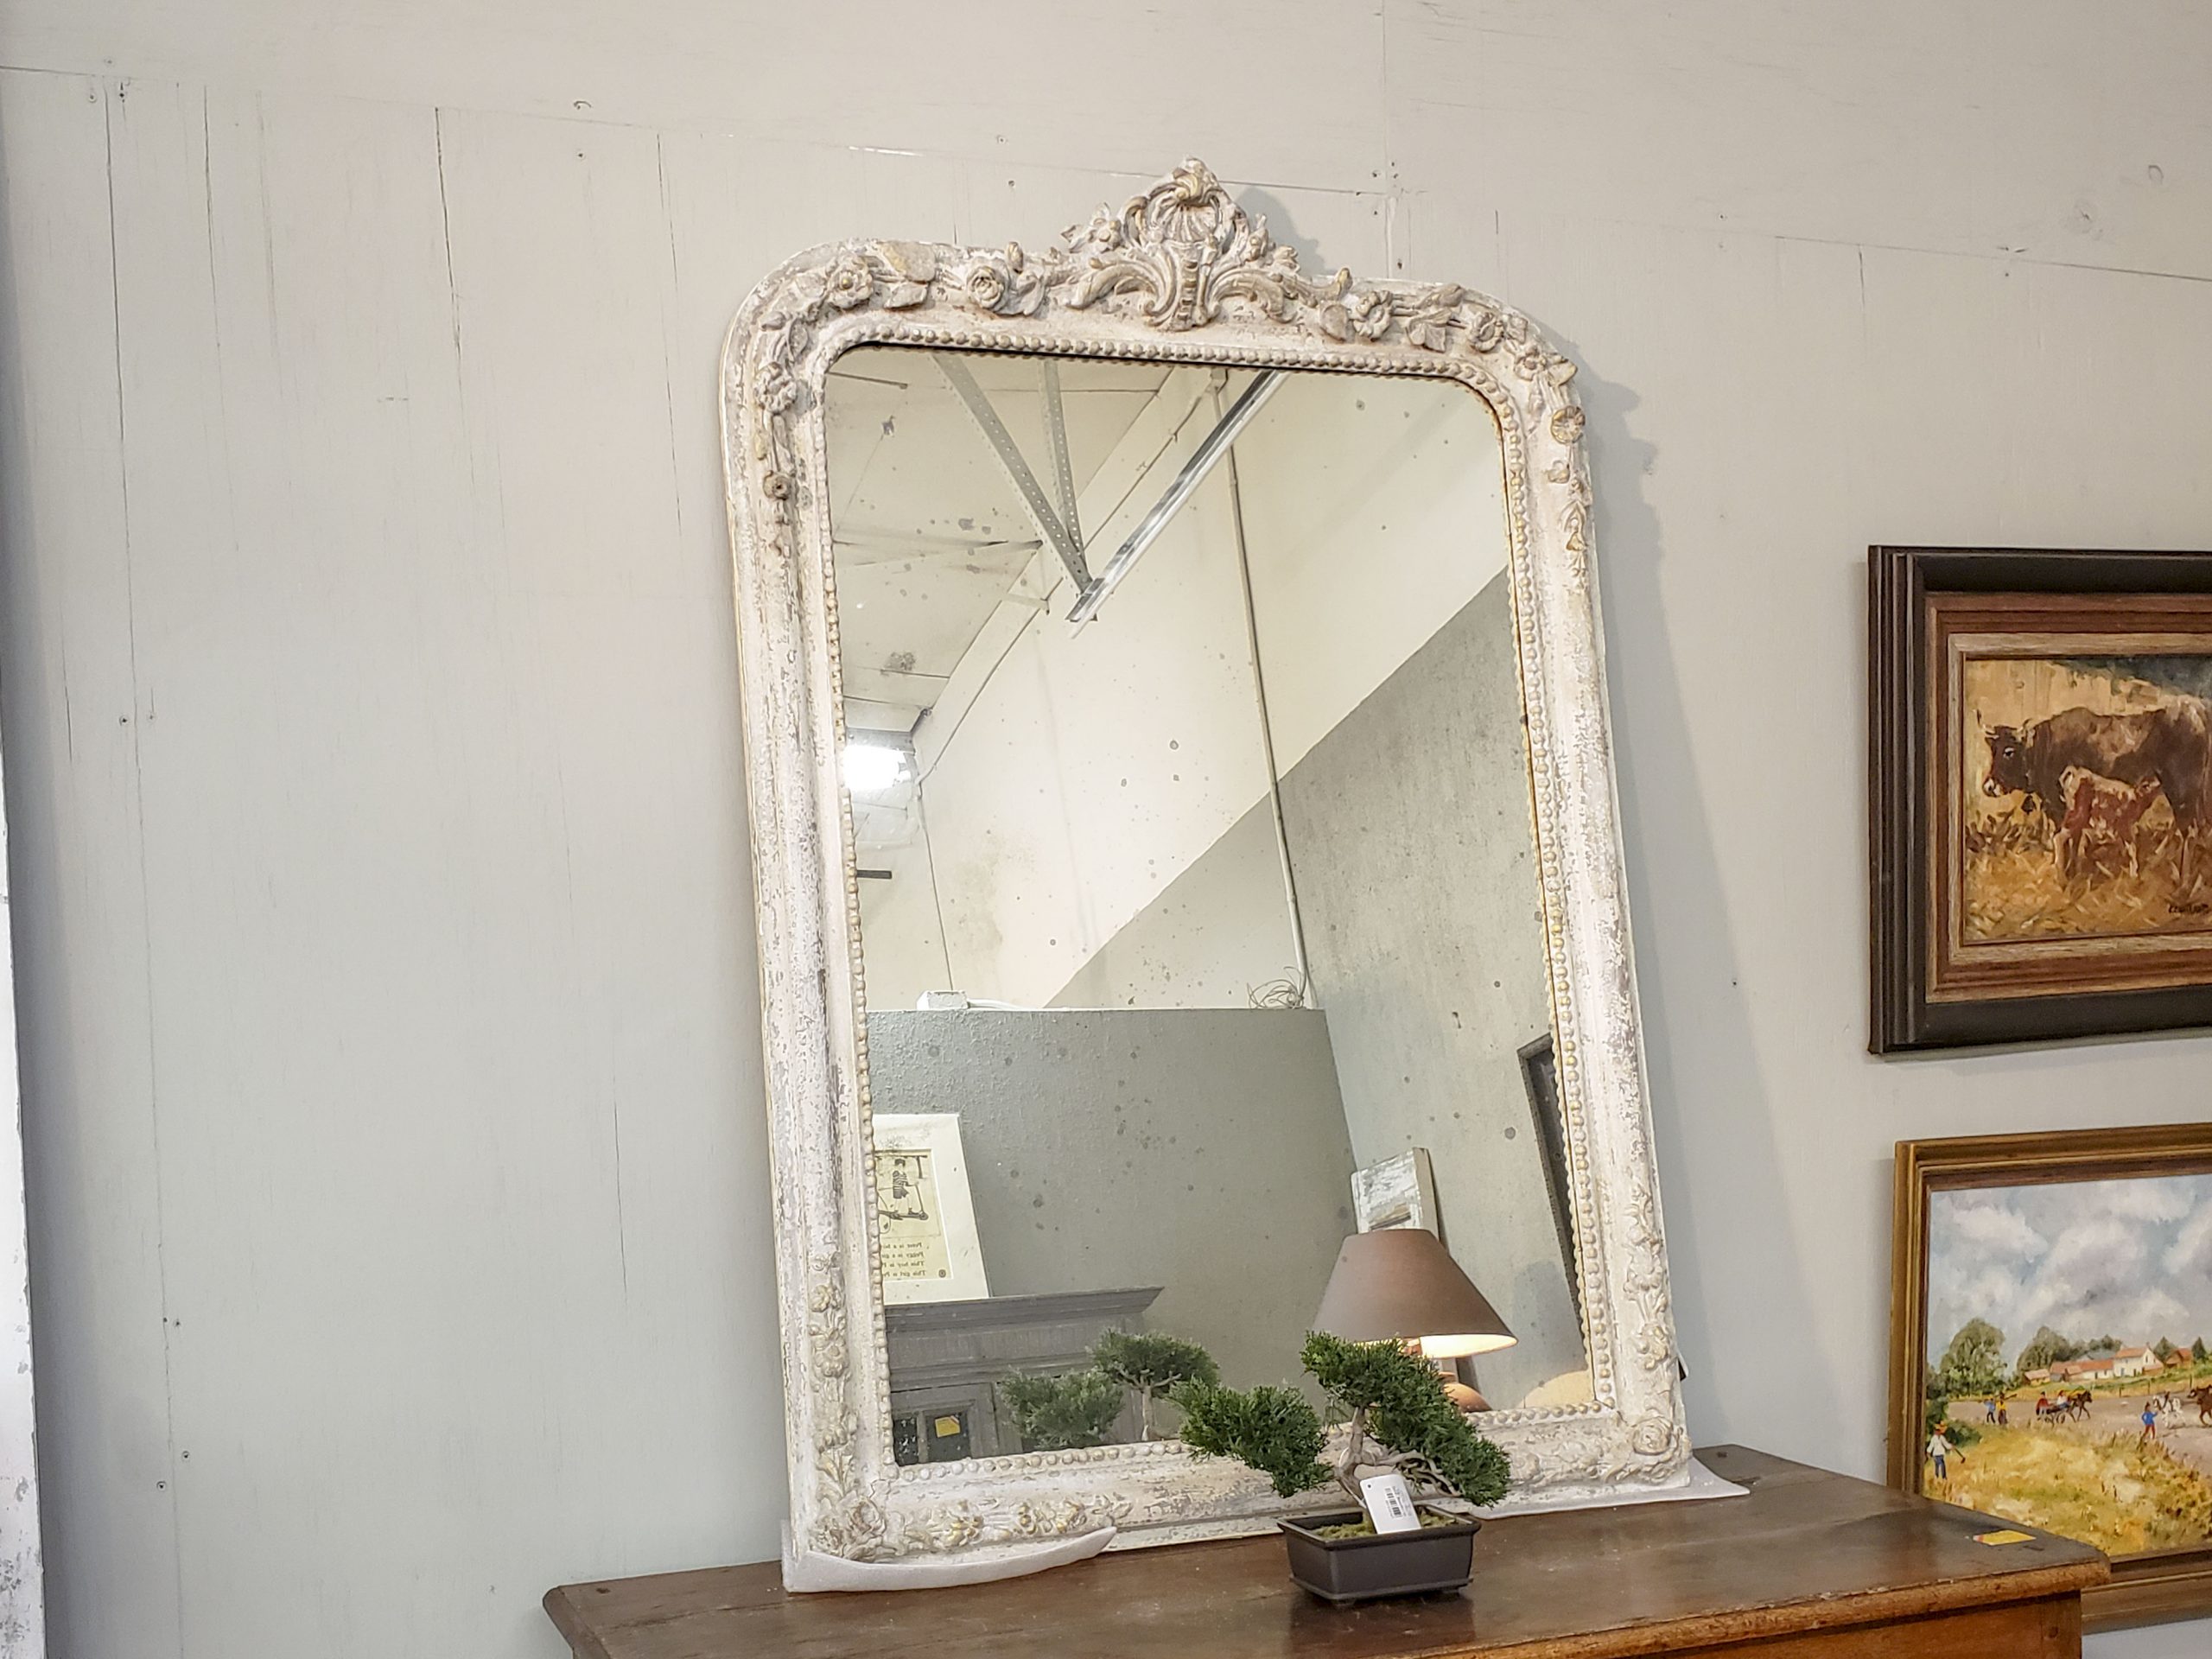 Louis Philippe Mirrors are a Huge Trend, and Here's How to Spot